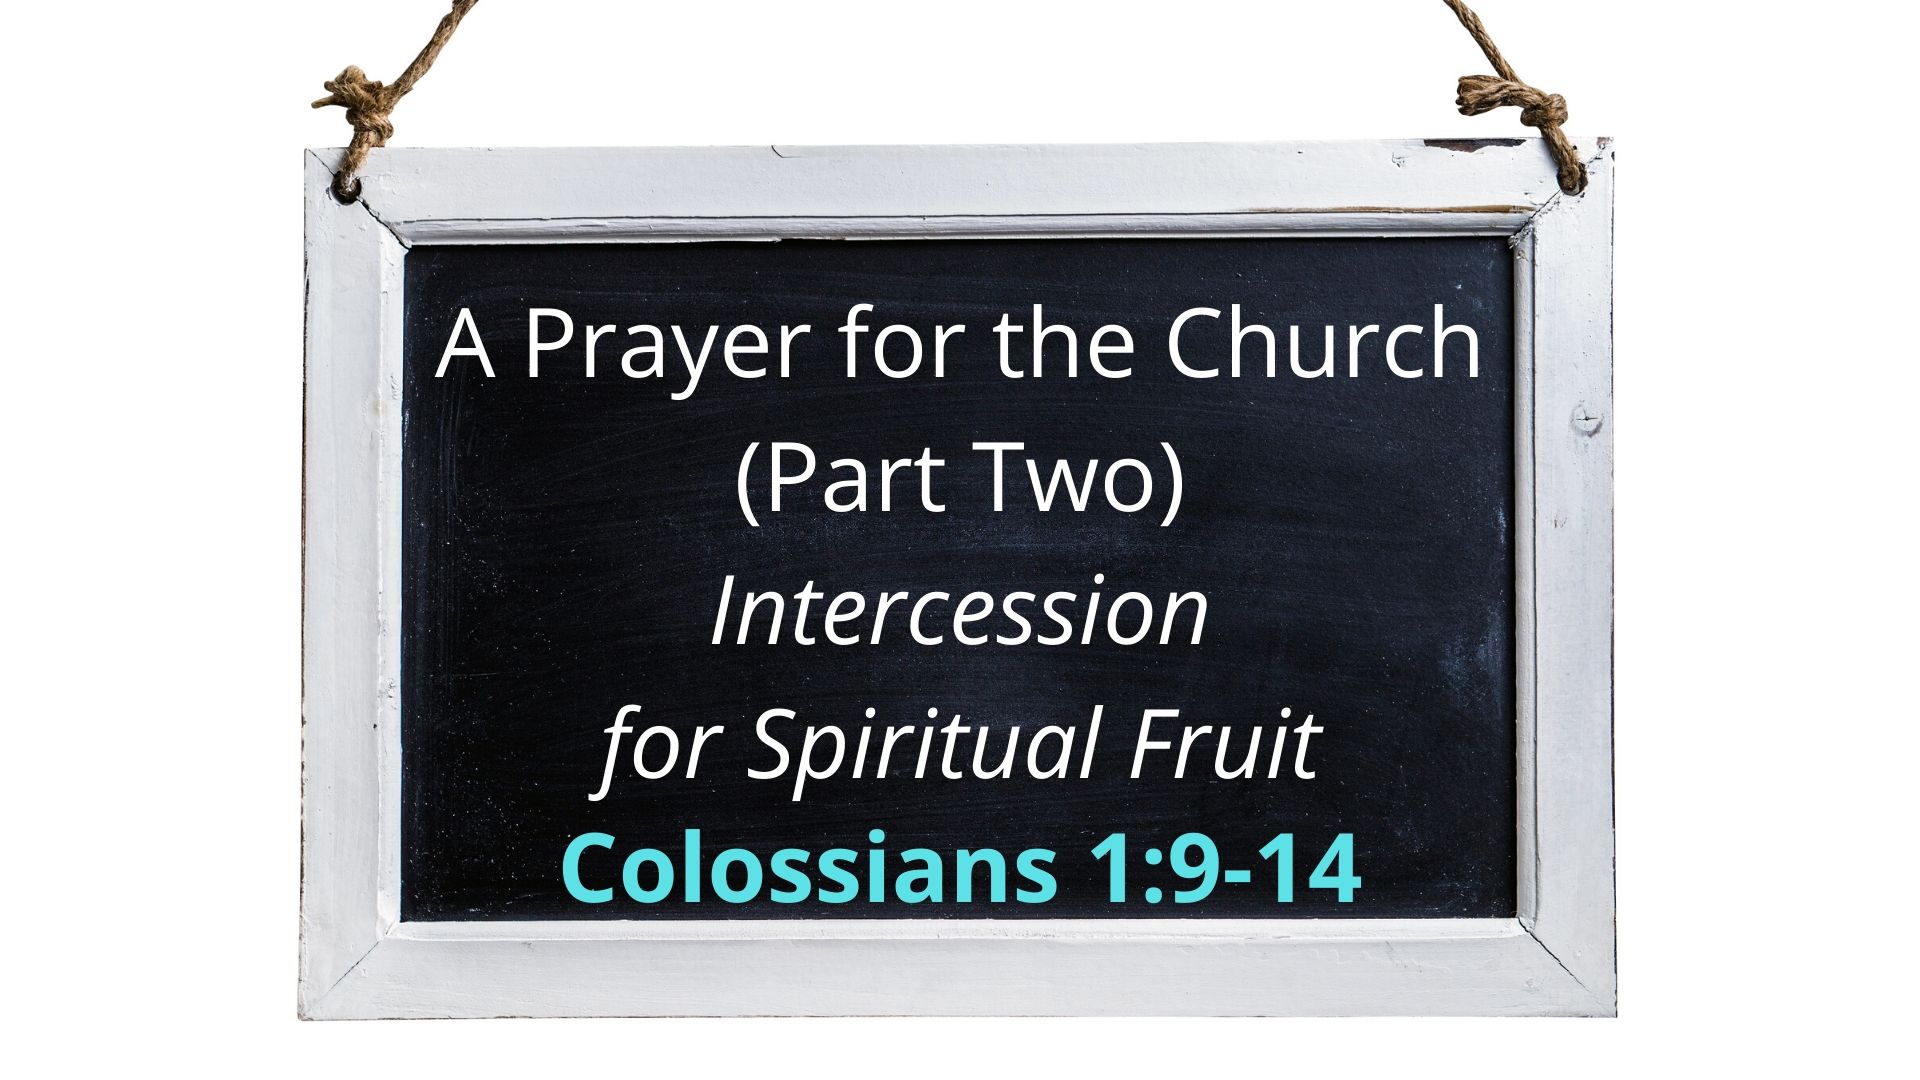 A Prayer for the Church (Part 2) Intercession for Spiritual Fruit (Colossians 1:9-14) Image